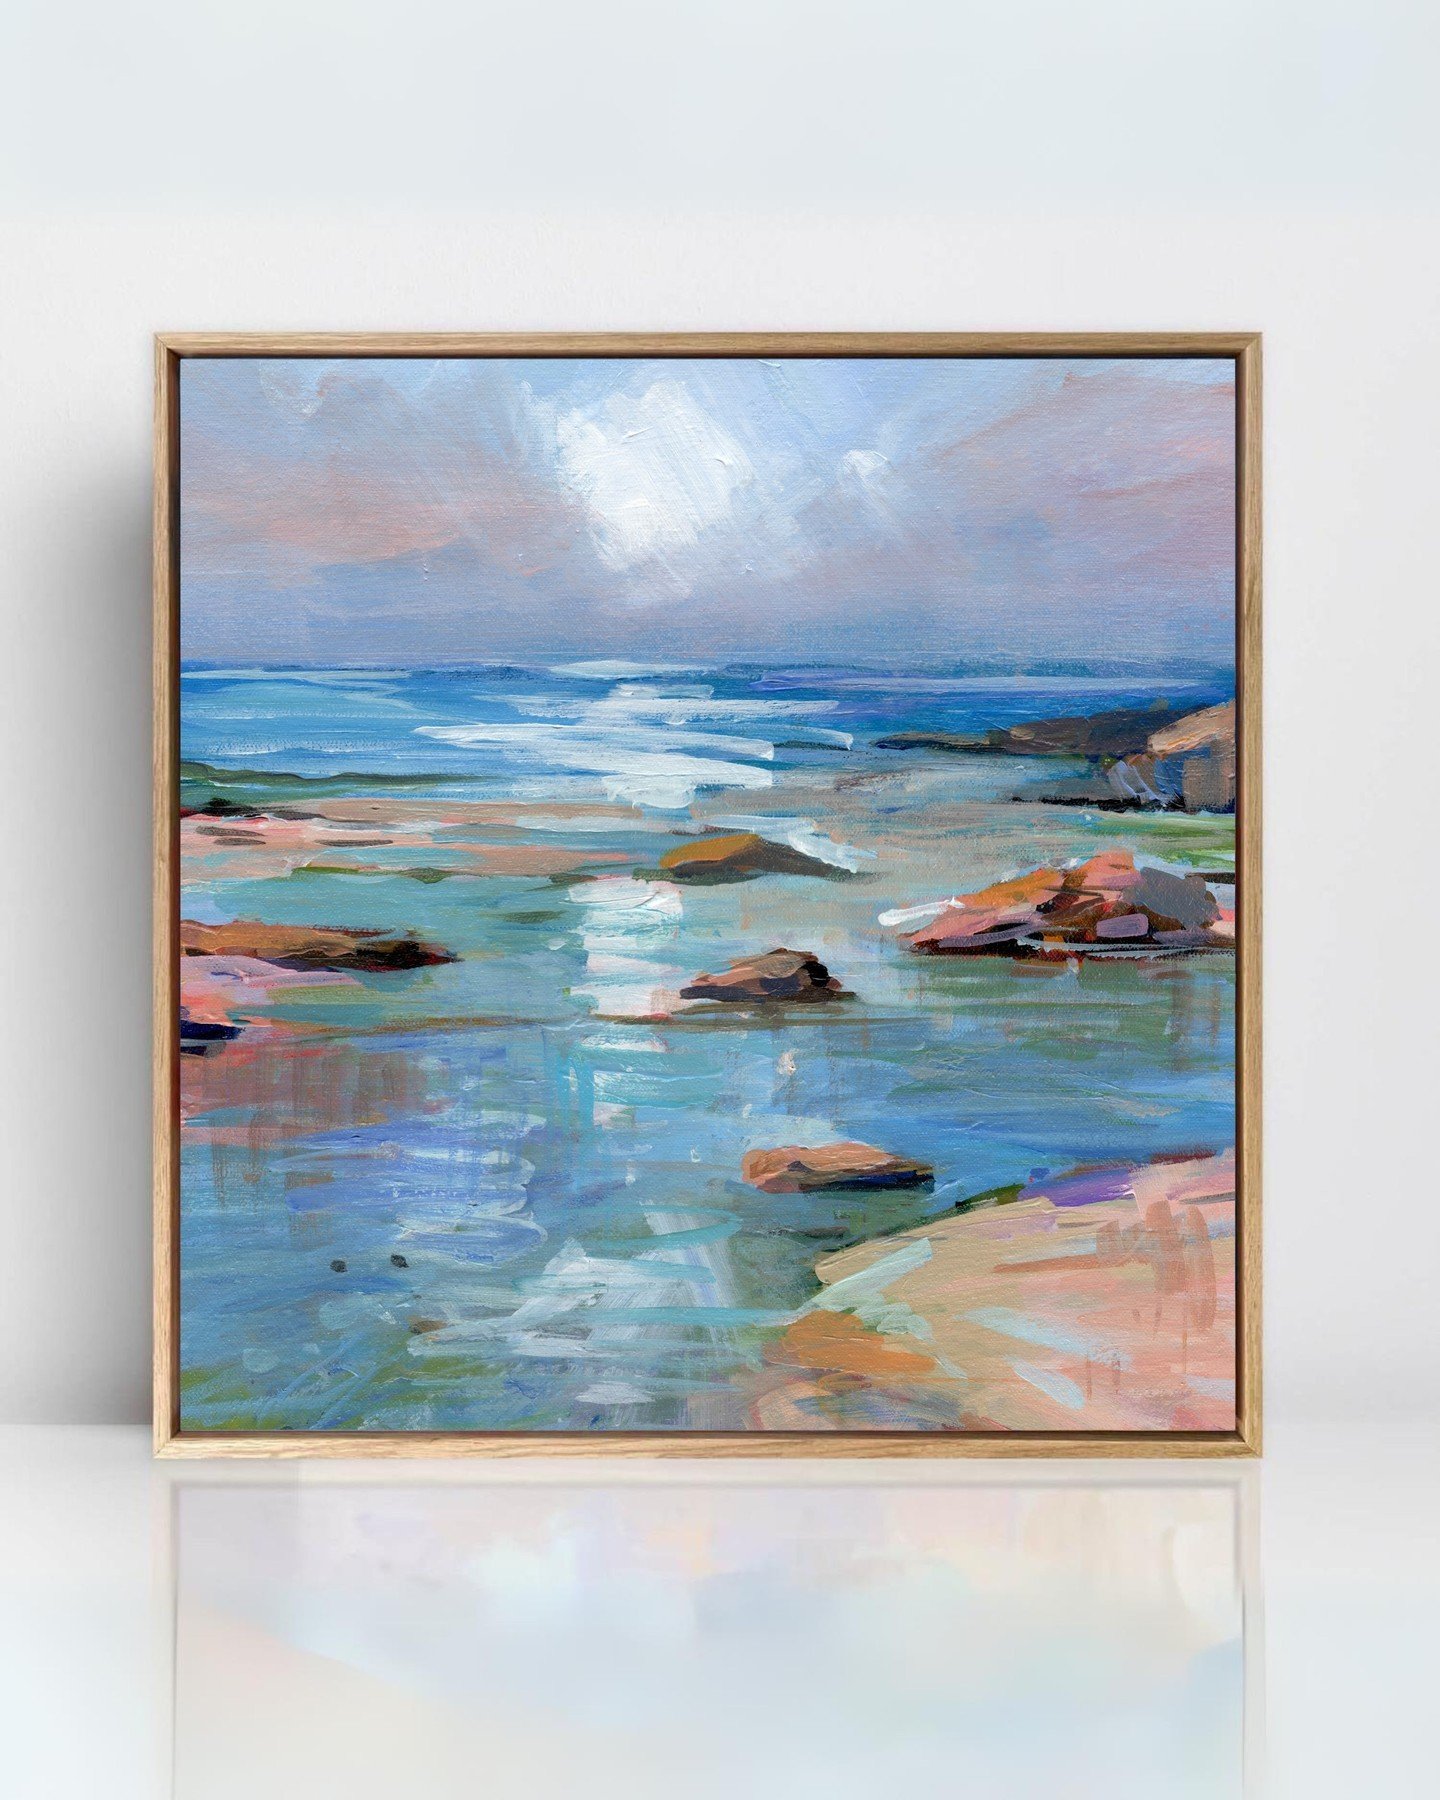 ✨ S P O T L I G H T &ldquo;Easing In&rdquo; ⁣
⁣
One of the special pieces making its debut at the Affordable Art Fair this week! ⁣
⁣
I've poured my heart into this one; it's a touch moody, capturing the deeper, contemplative side of the sea.⁣
⁣
🩵 Wh